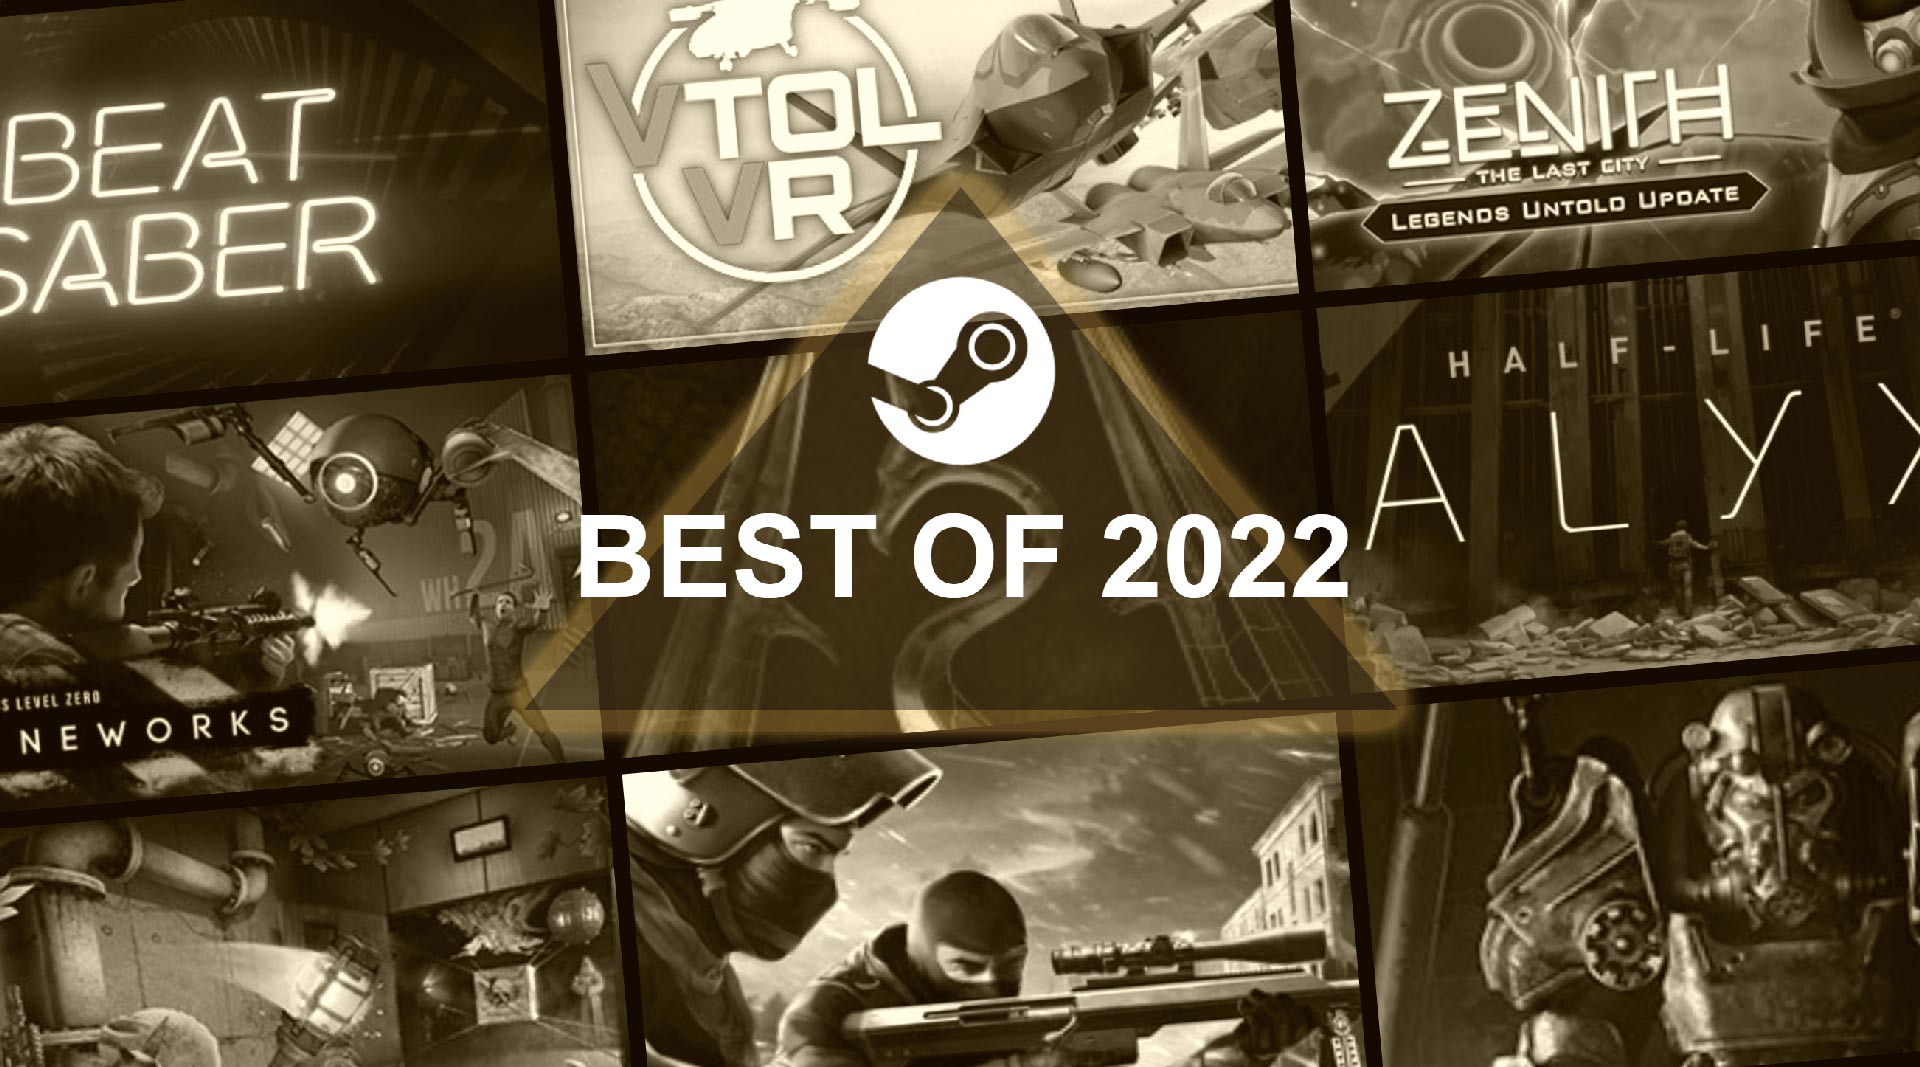 Valve Reveals Top Selling VR Games on Steam in 2022